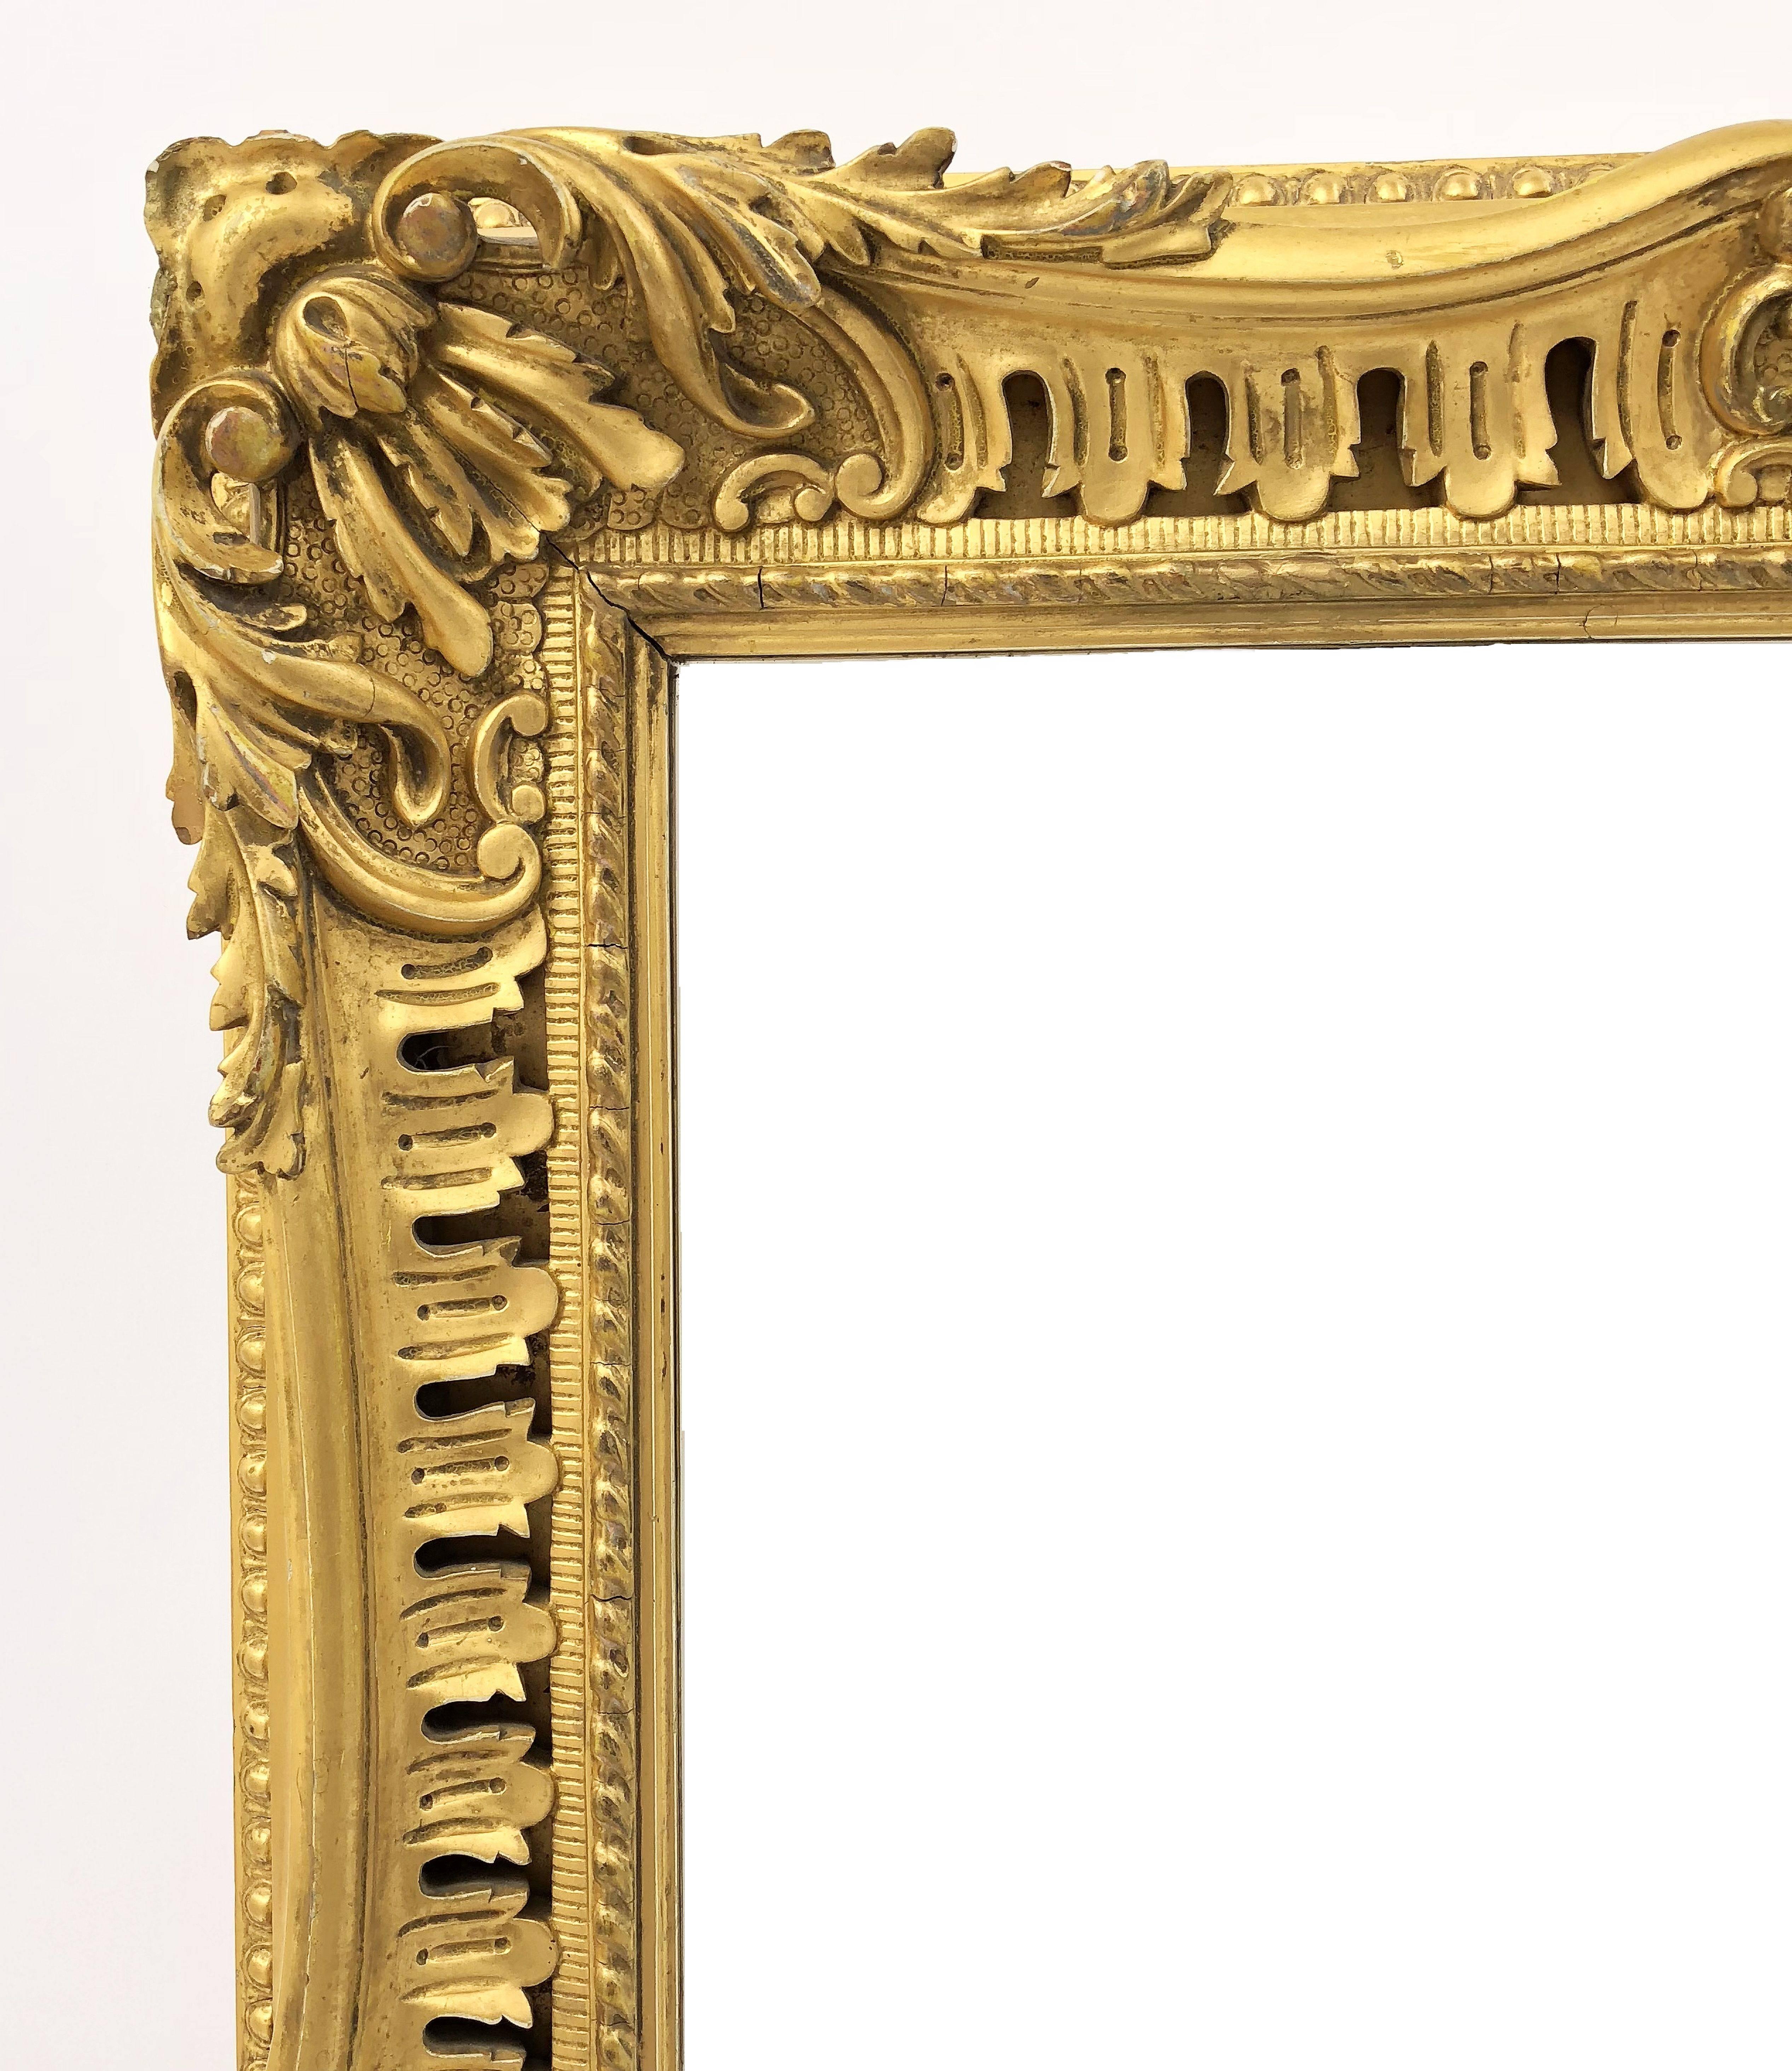 A fine English rectangular beveled mirror with a carved gilt frame.

Dimensions are: Height 35 1/4 inches x Width 27 inches x Depth 3 inches.
 